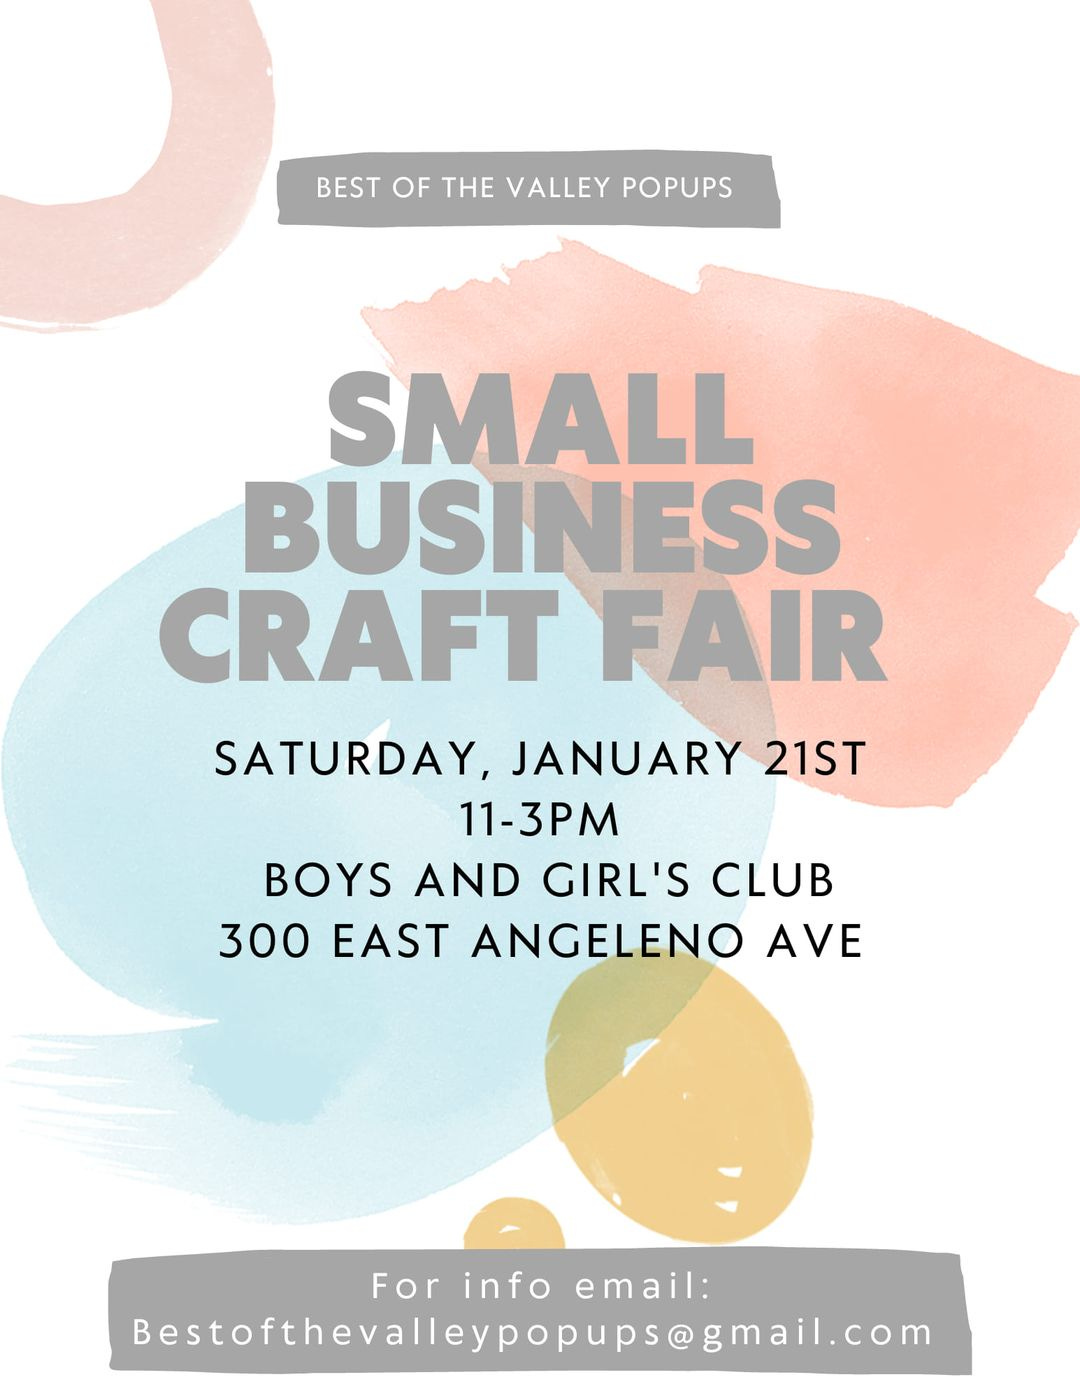 May be an image of text that says 'BEST OF THE VALLEY POPUPS SMALL BUSINESS CRAFT FAIR SATURDAY, JANUARY 21ST 11-3PM BOYS AND GIRL'S CLUB 300 300E EAST ANGELENO AVE For info email: Bestofthevalleypopups@gmail.com'